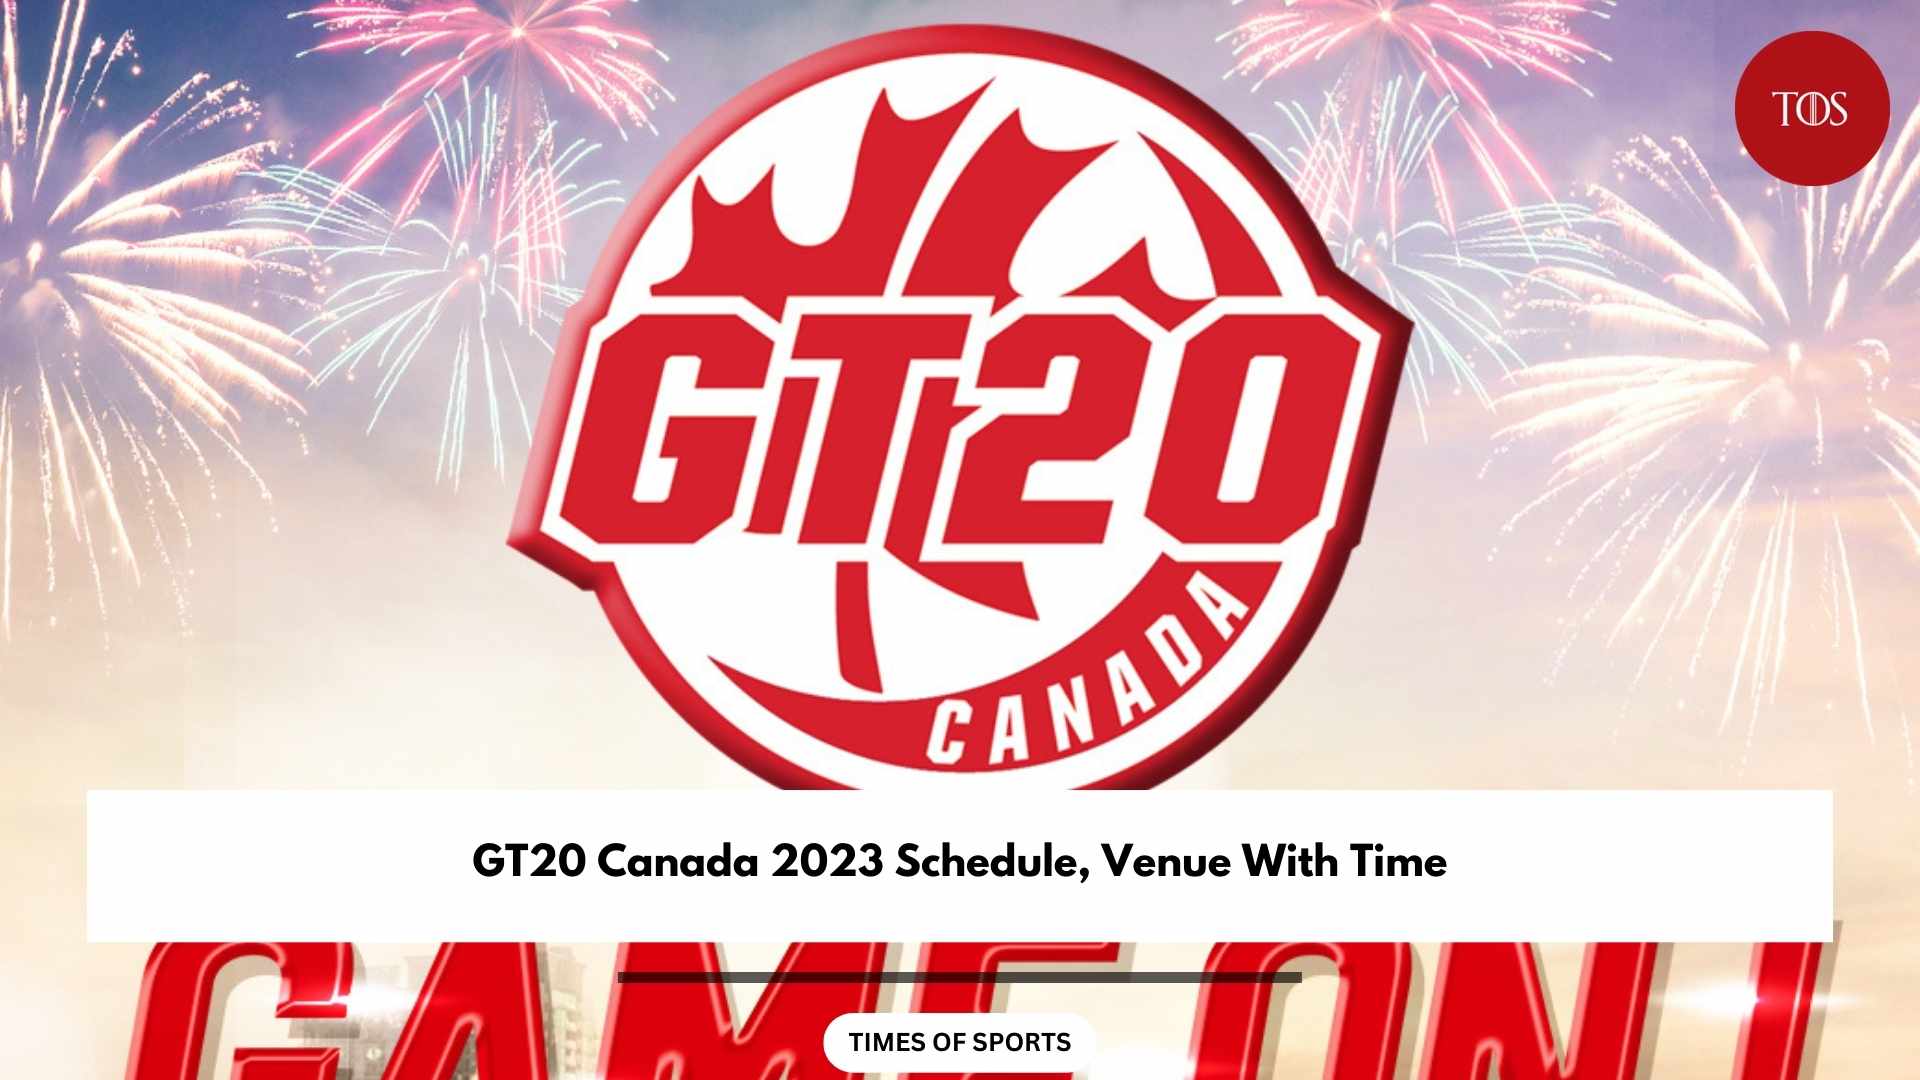 GT20 Canada 2023 Schedule, Venue With Time